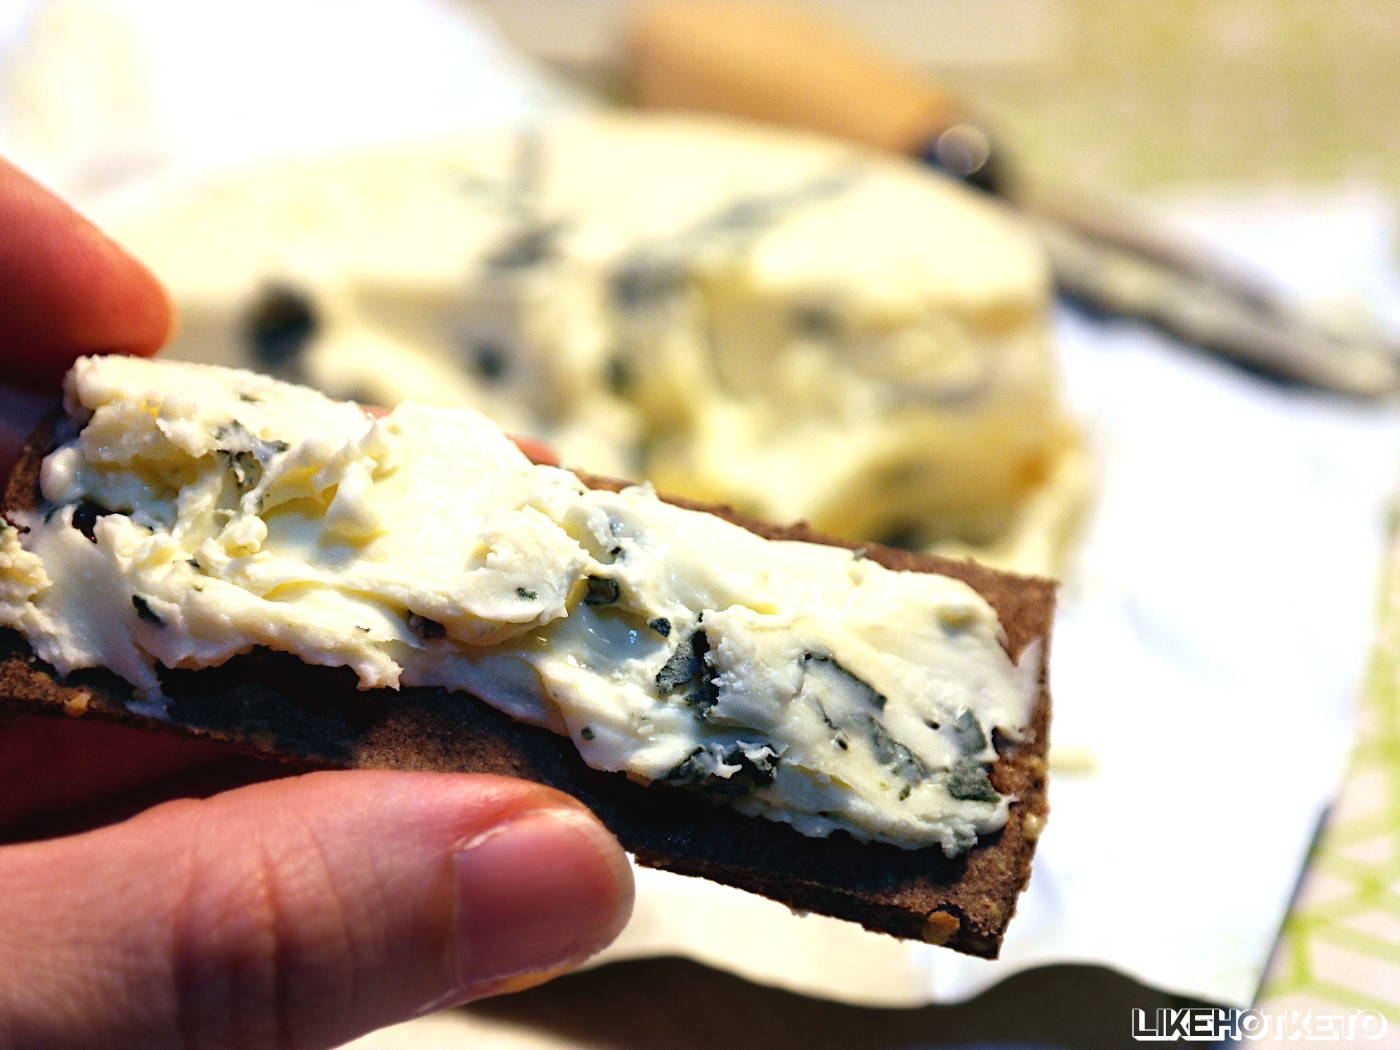 Keto and gluten-free thin cracker topped with soft blue cheese.